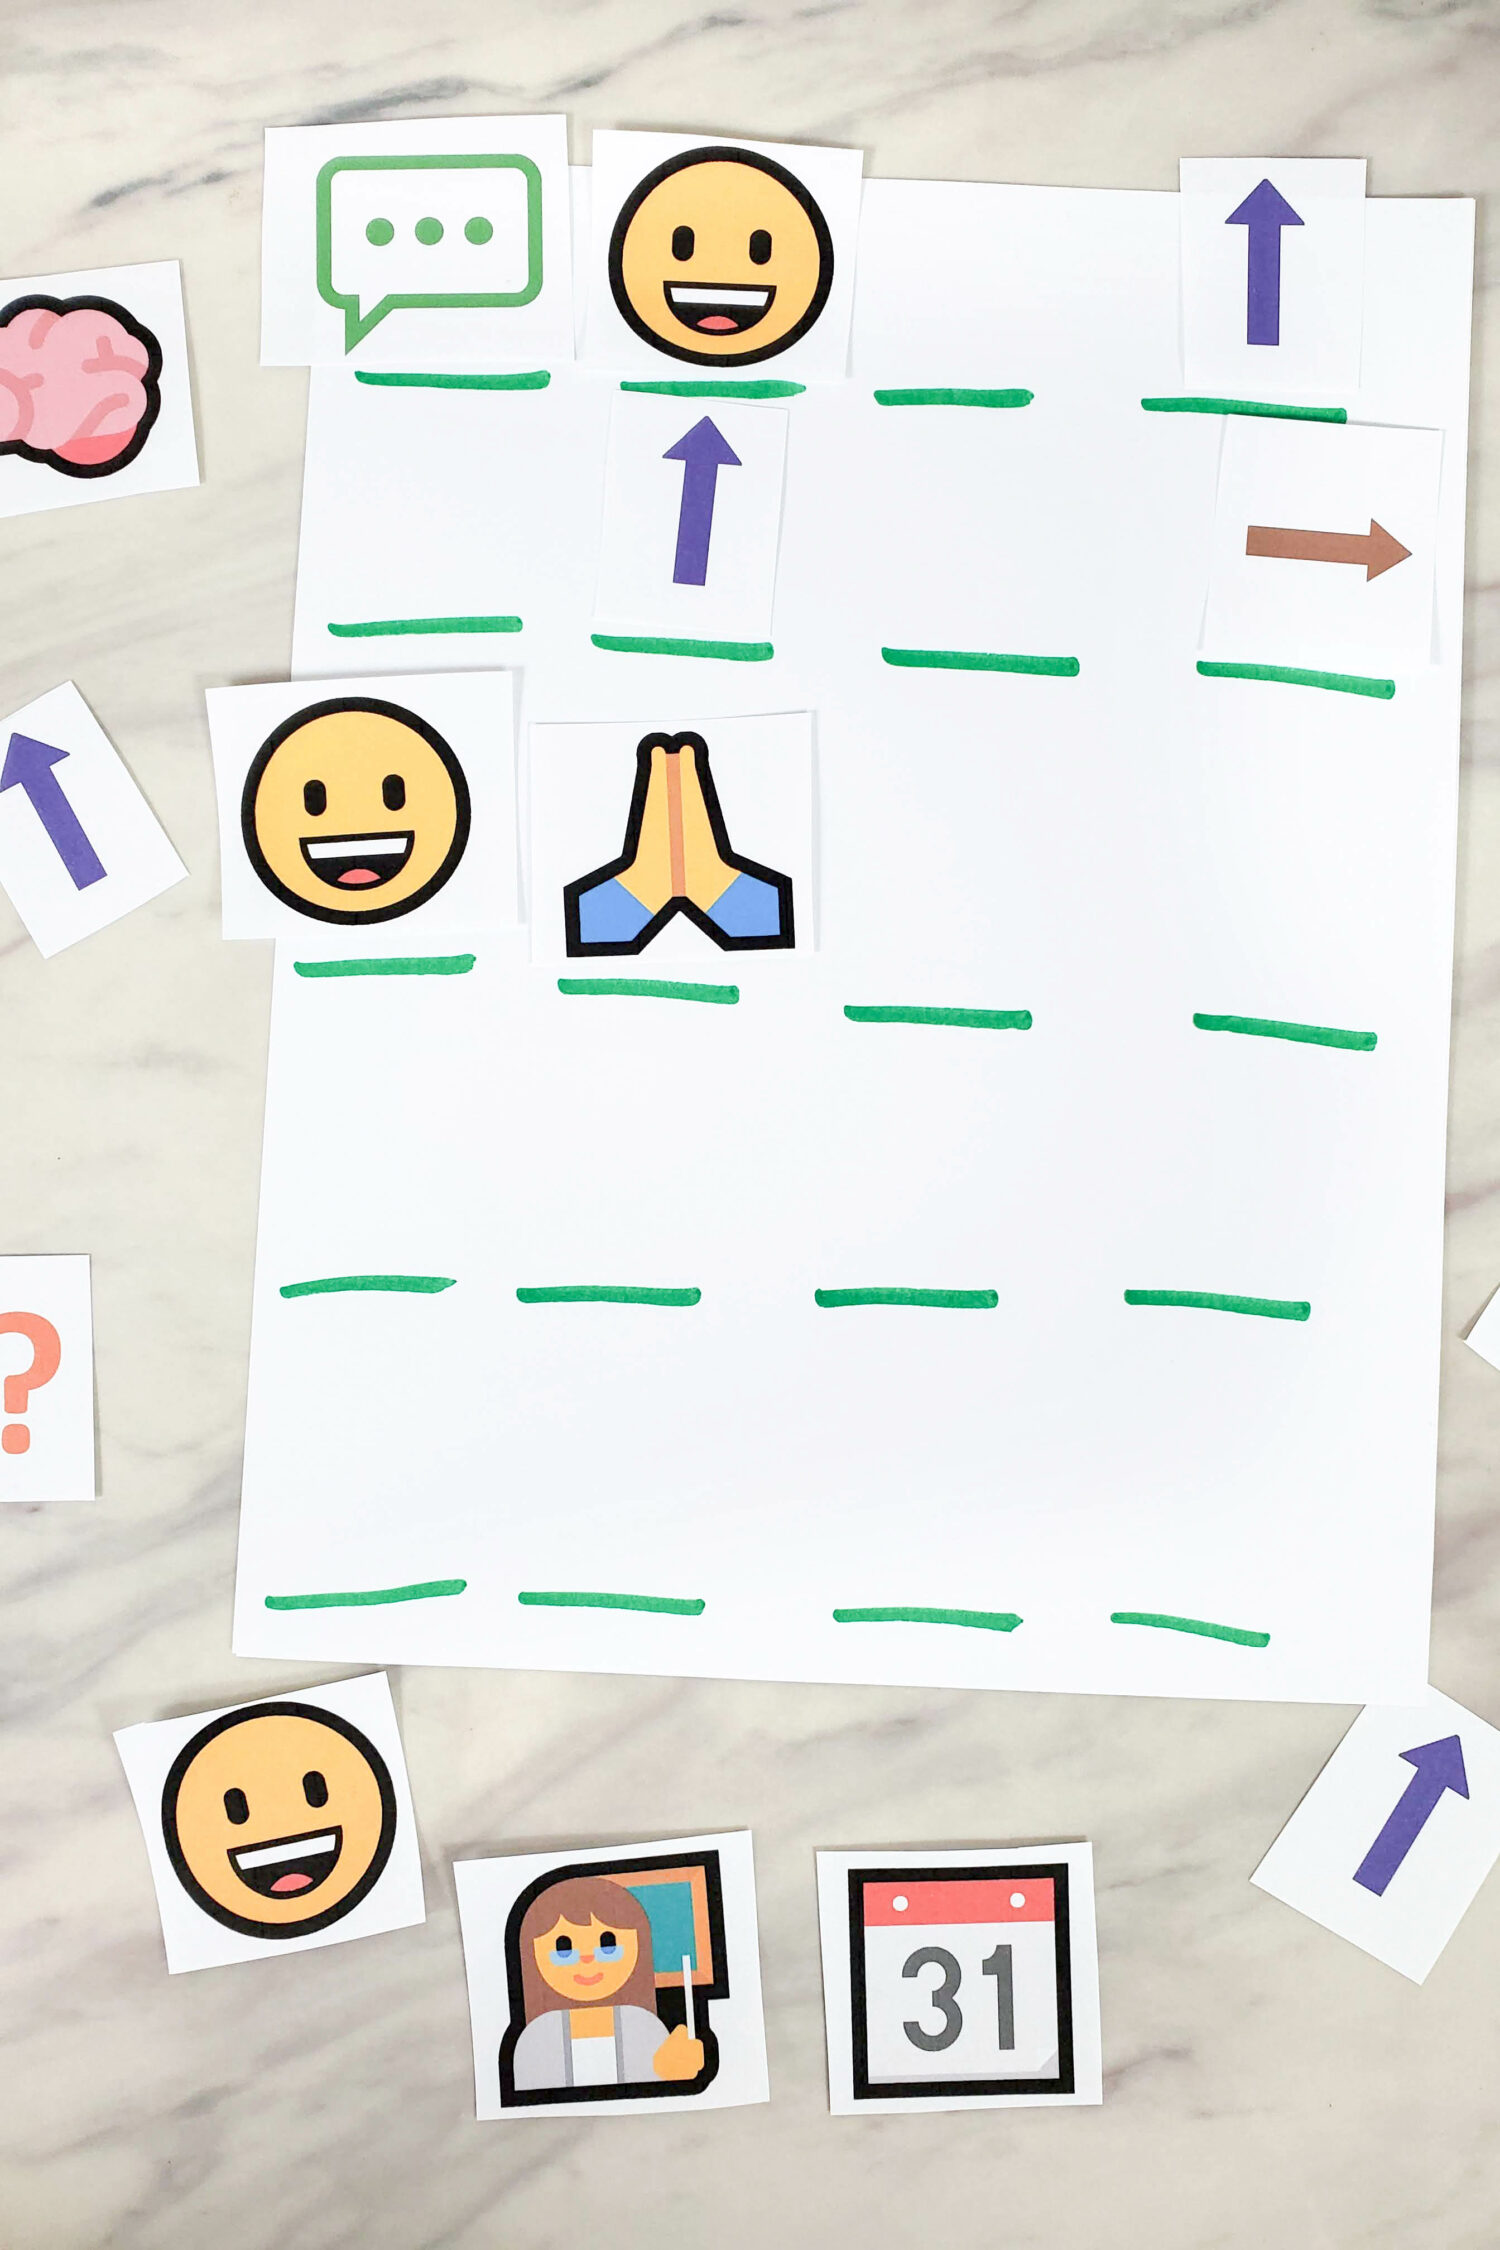 Tell Me Dear Lord Crack the Code singing time review activity! Can you decode the symbols or rearrange them in order? Great logical learning idea for LDS Primary music leaders and families.